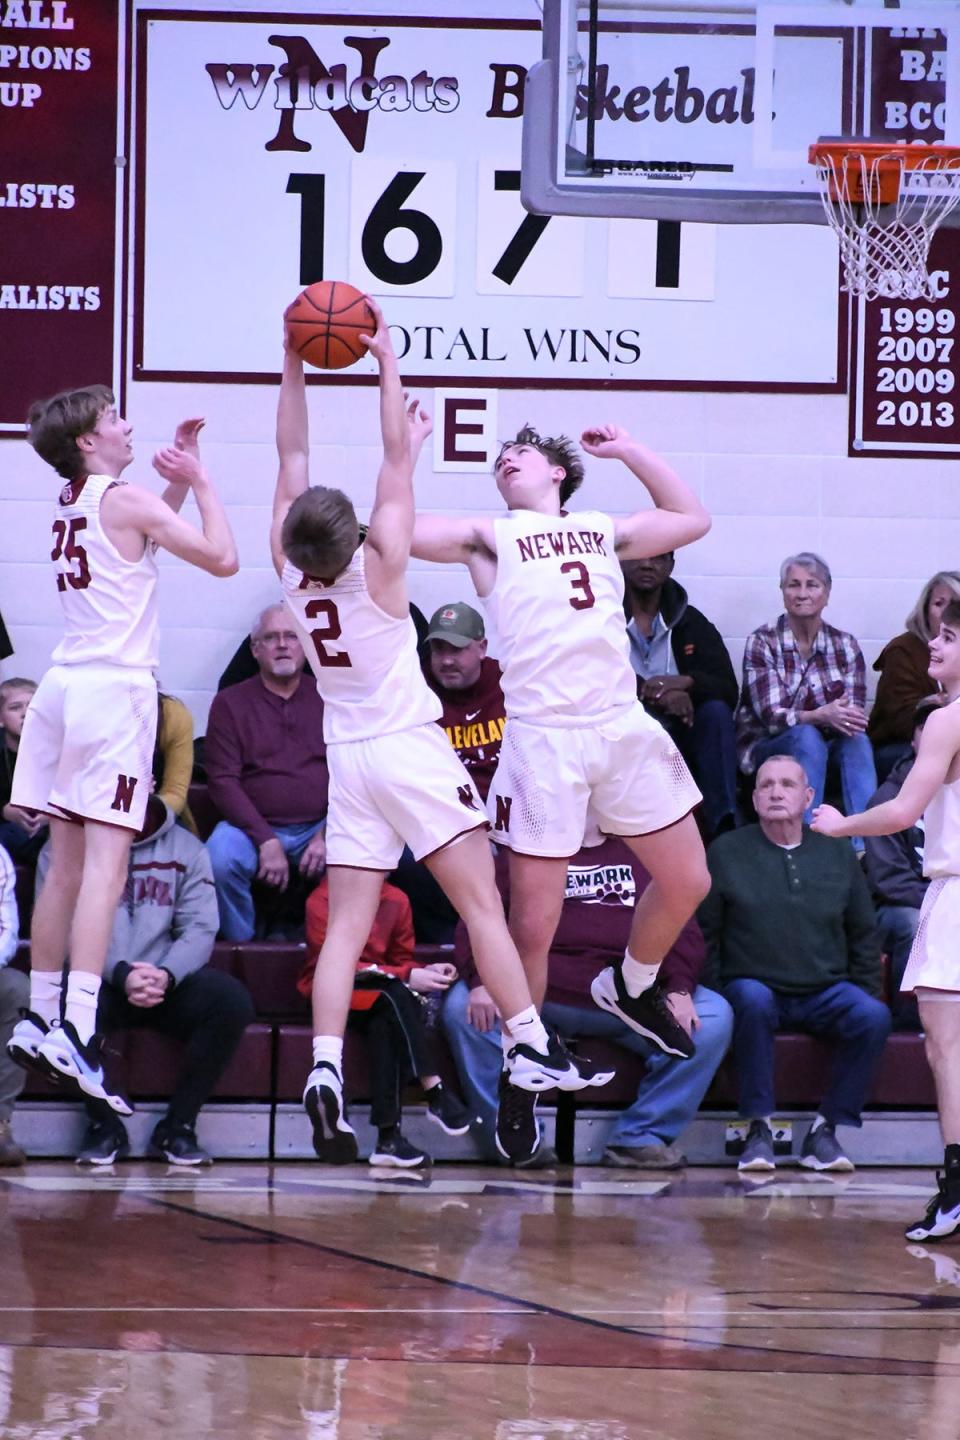 Newark junior Drew Oberholtzer (2) grabs a rebound between teammates senior Grant Somers (25) and sophomore Steele Meister (3) against Pickerington Central at Jimmy Allen Gymnasium on Friday, Jan. 21, 2022. The host Wildcats fell 54-42 in an Ohio Capital Conference-Buckeye Division showdown.